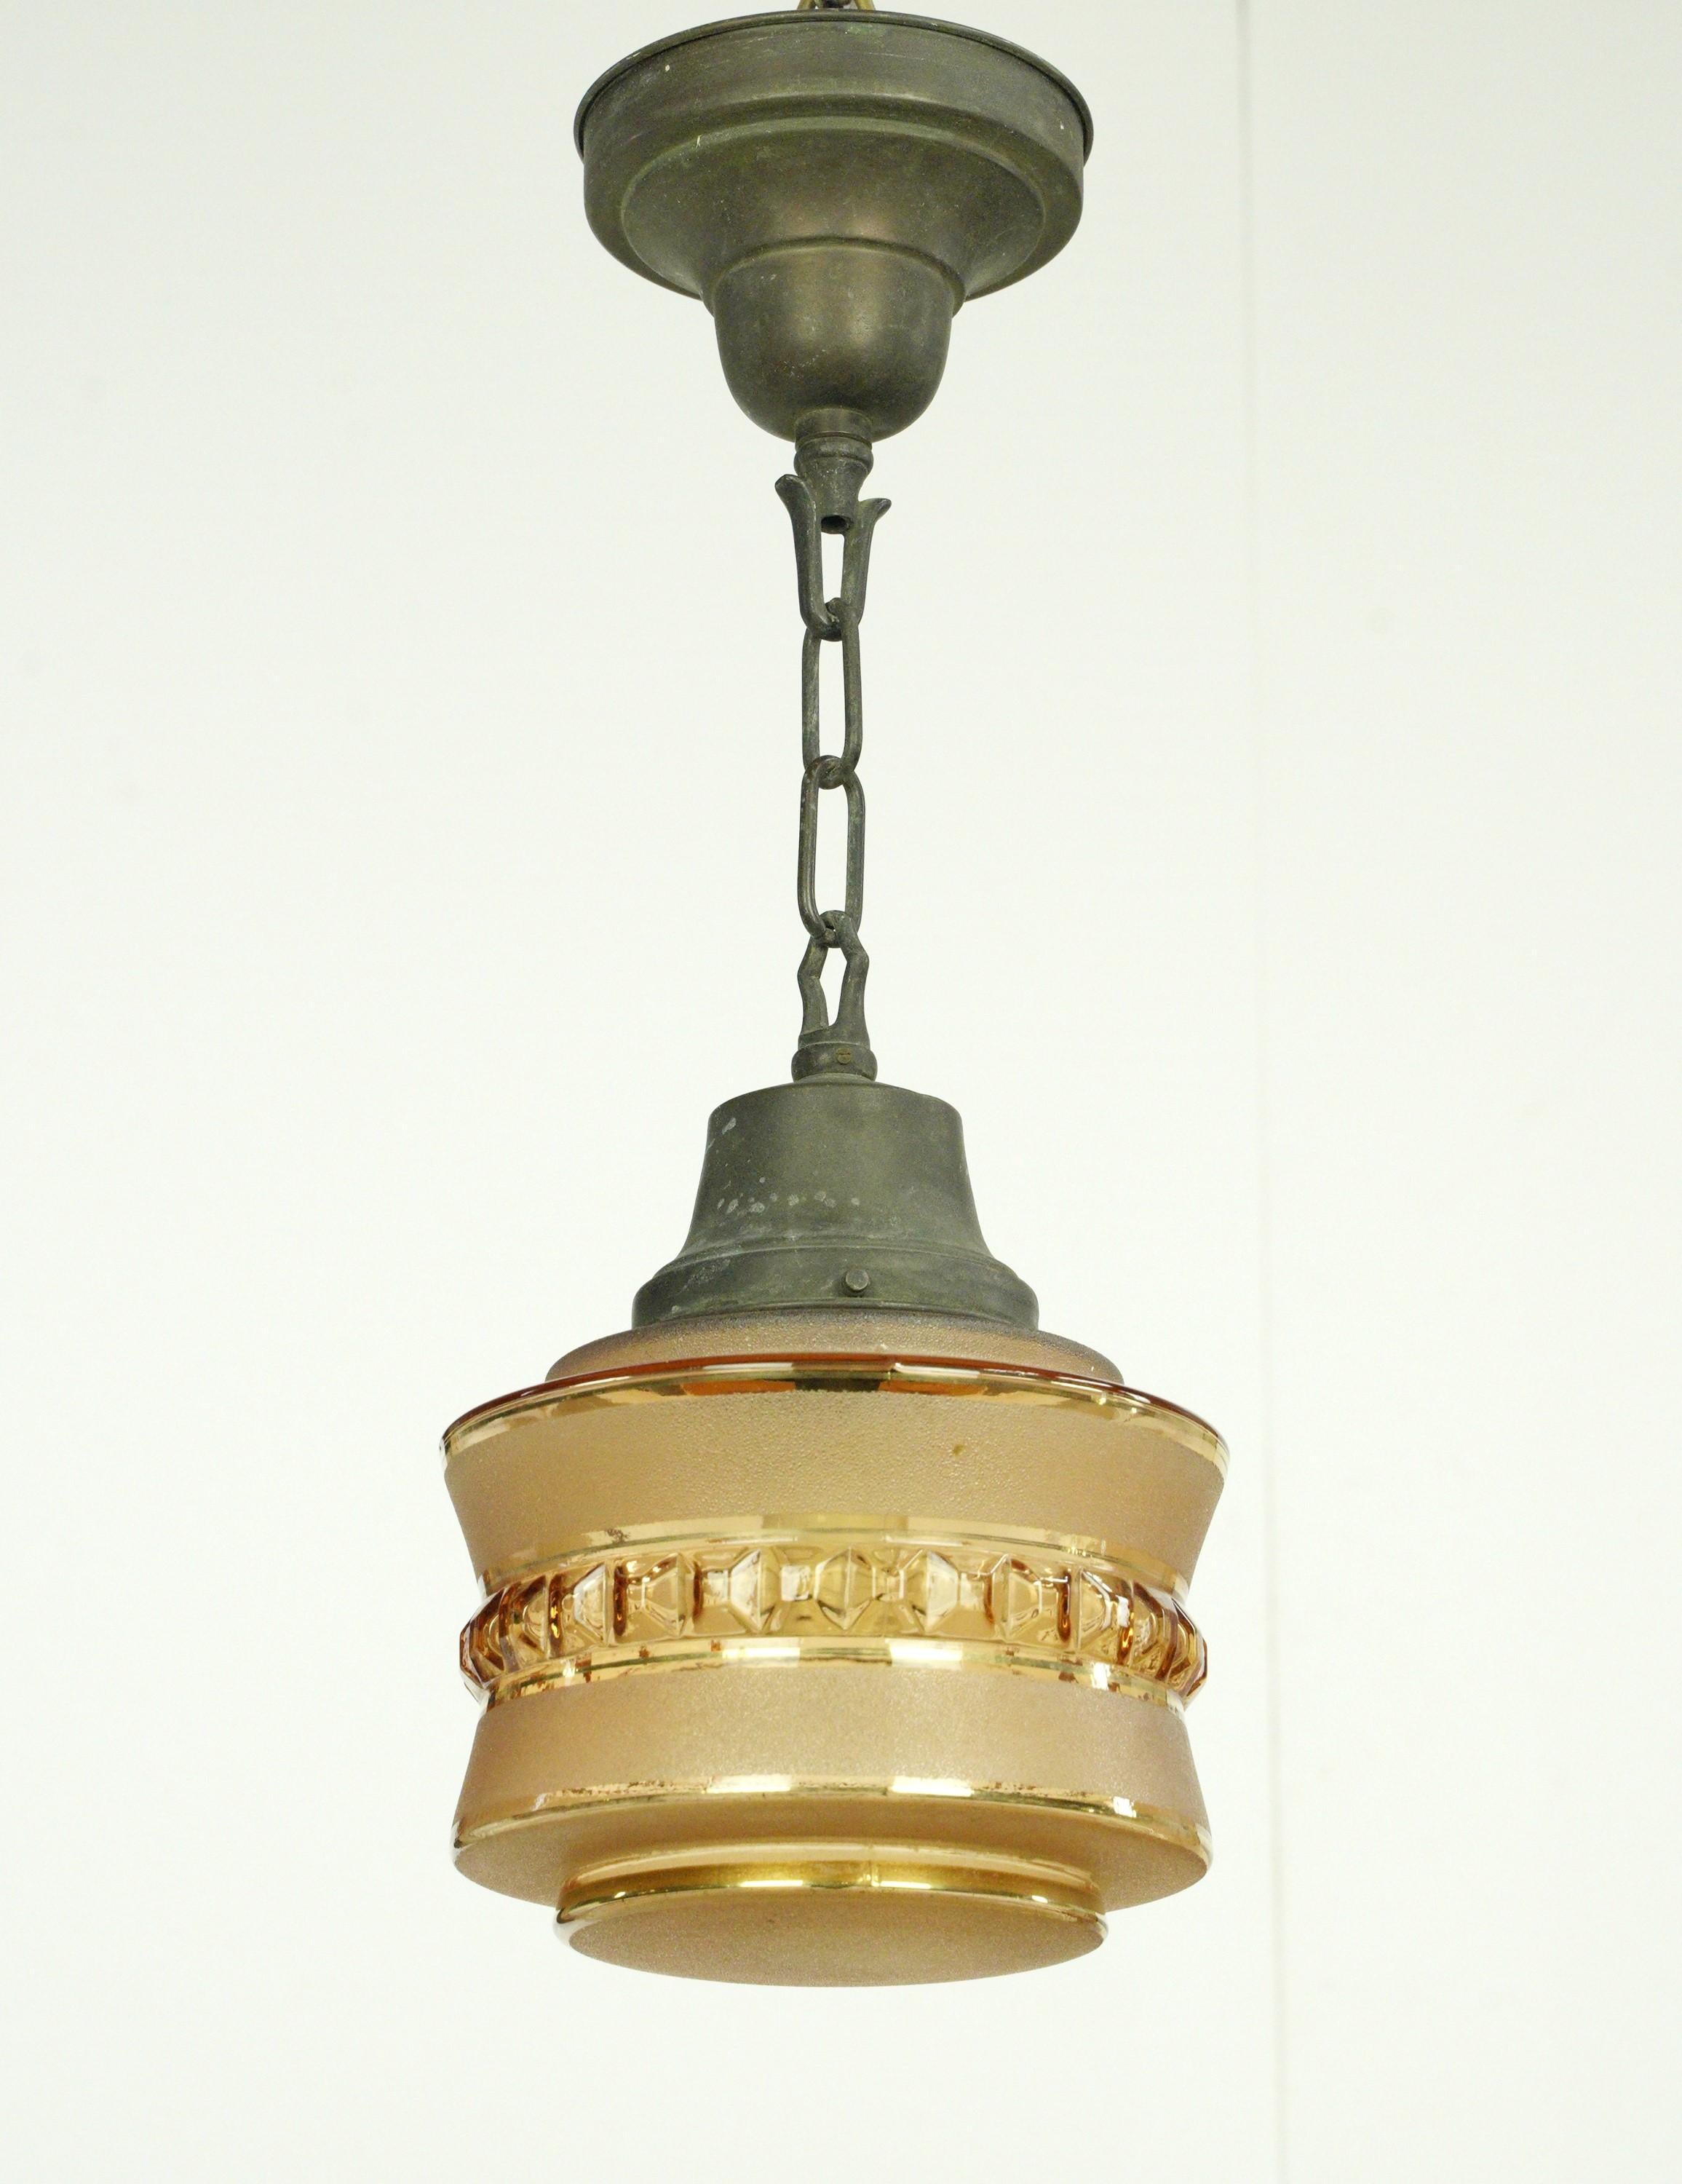 Pendant light with a textured tan globe and bronze chain. This requires one standard medium base bulb. The price includes restoration of cleaning and rewiring. Good condition with appropriate wear from age. One available. Cleaned and restored.